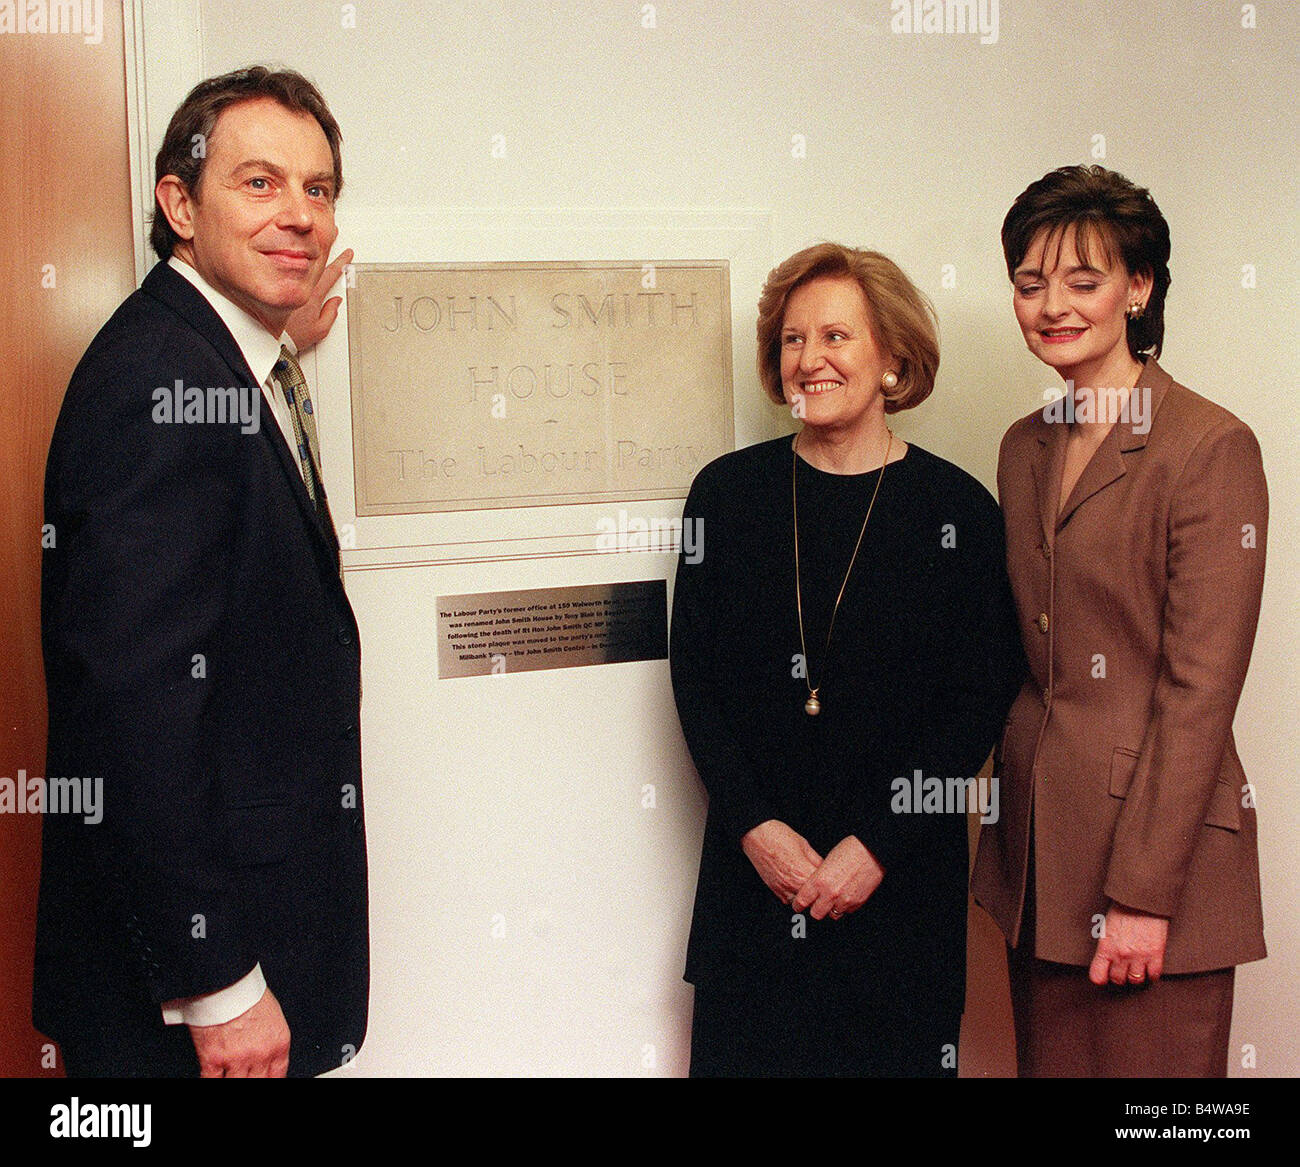 Tony Blair unviels the John Smith plaque at the Labour Party headquarters Millbank Tower watched by Elizabeth Smith now Baroness Smith of Gilmorehill and his wife Cherie 24 3 98 Stock Photo